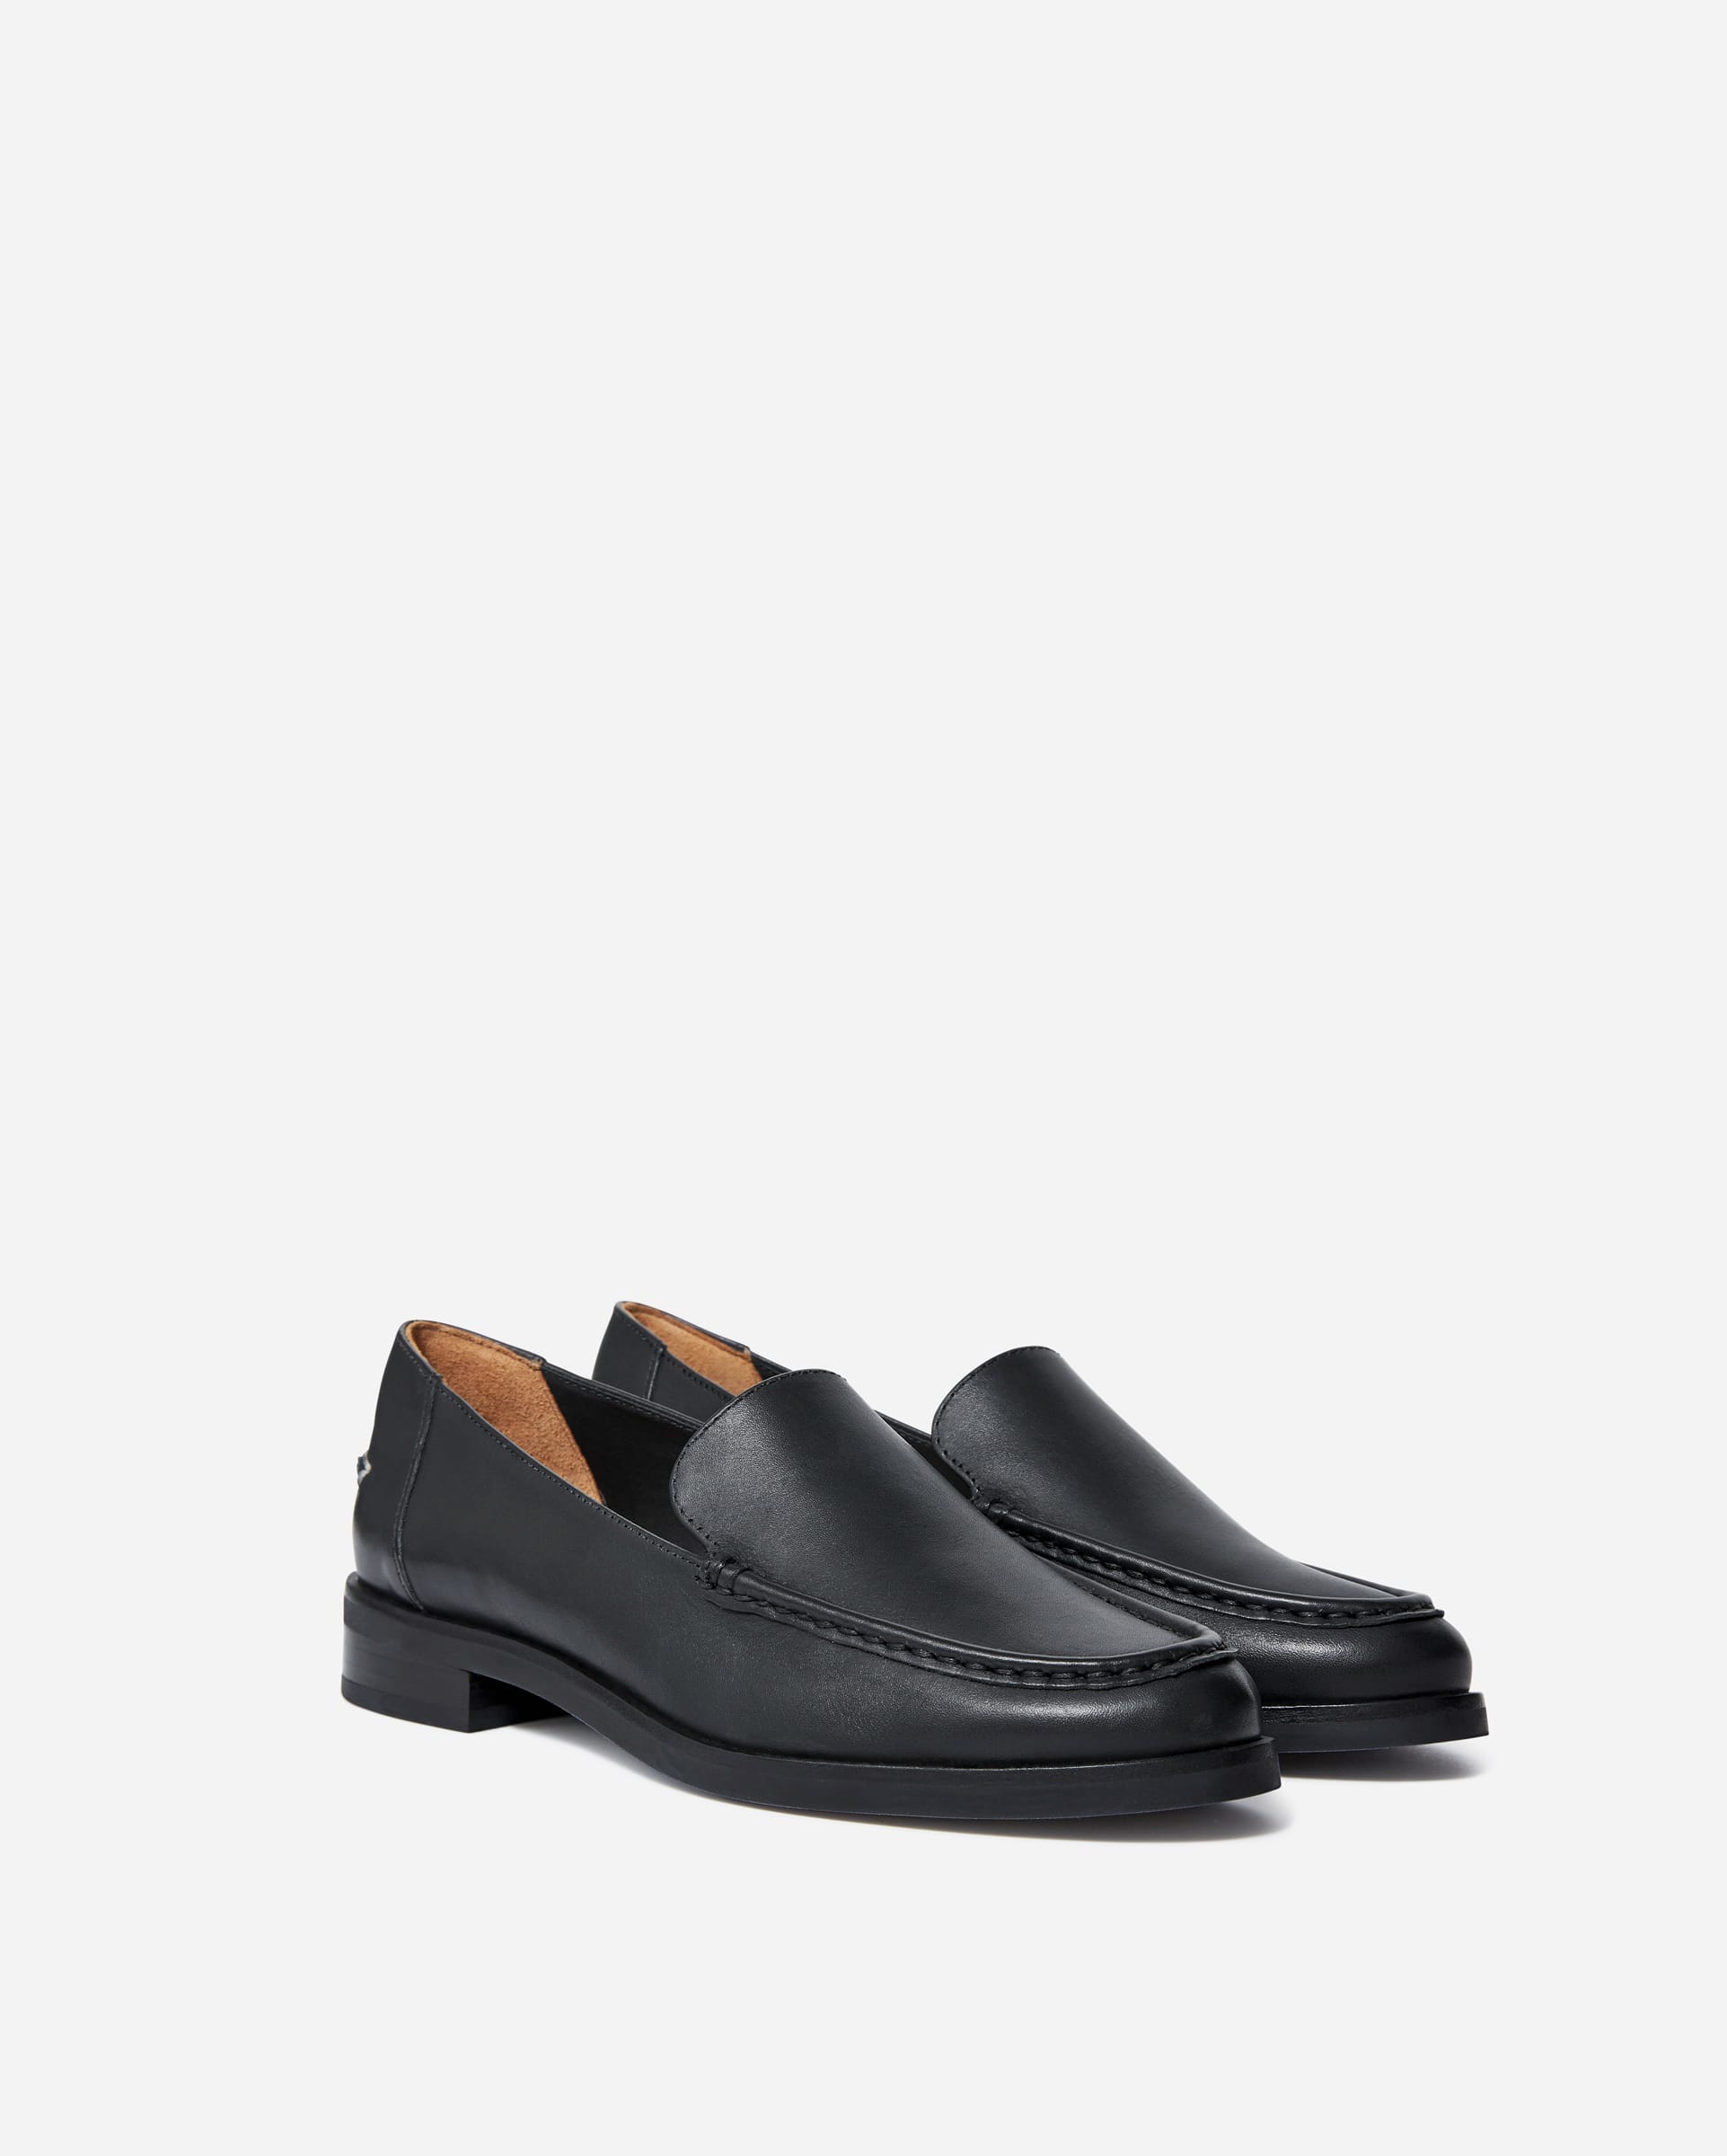 Image of The Modern Loafer